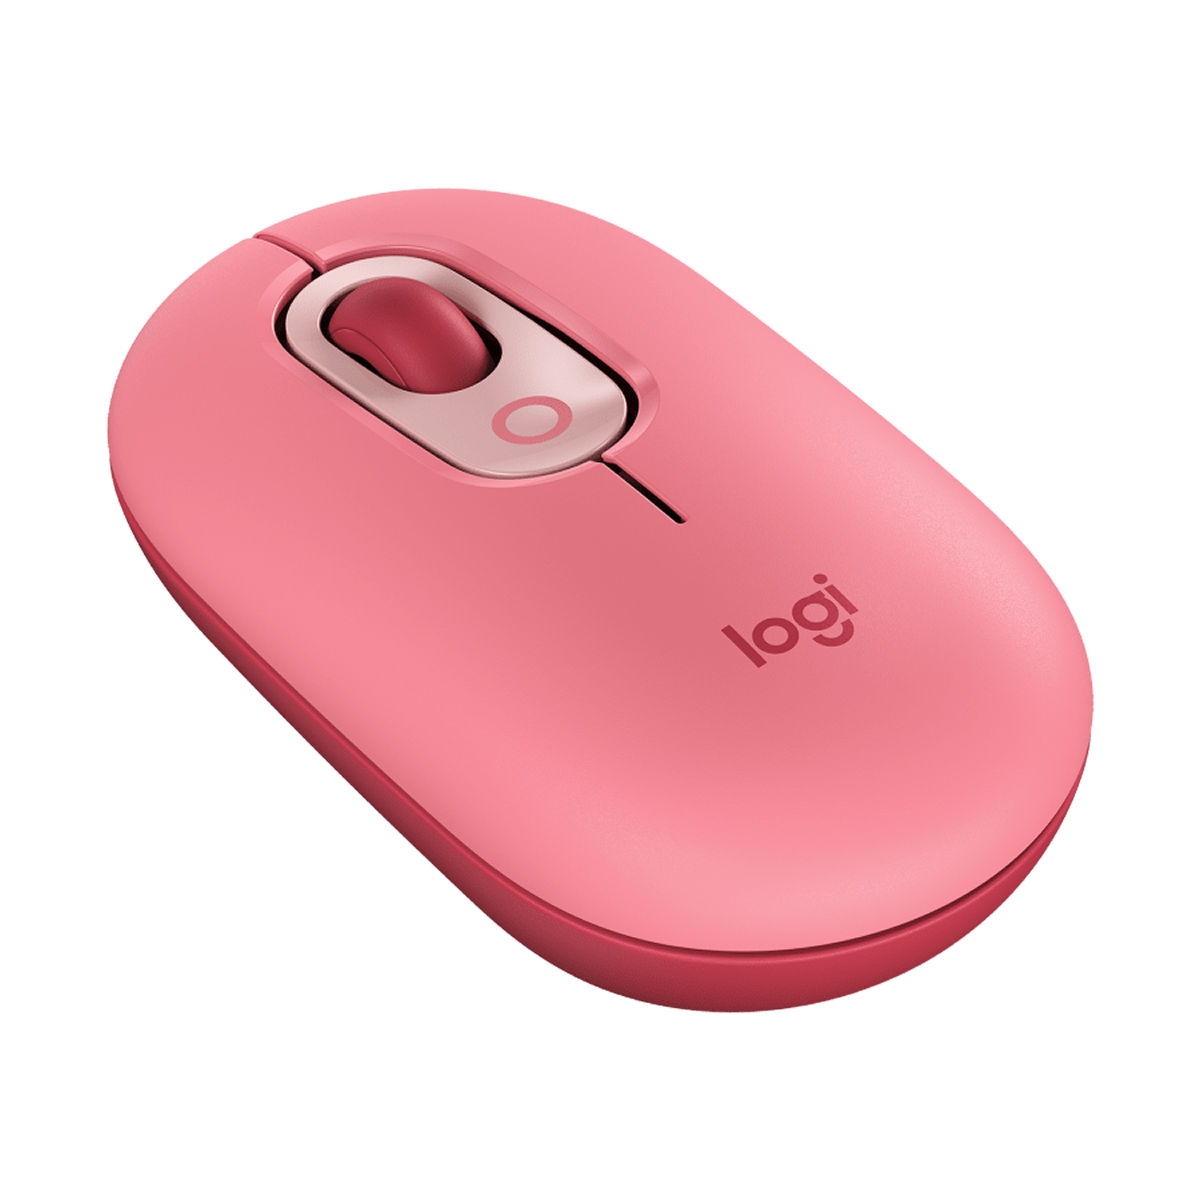 MOUSE LOGITECH WIRELESS POP MOUSE CORAL ROSE